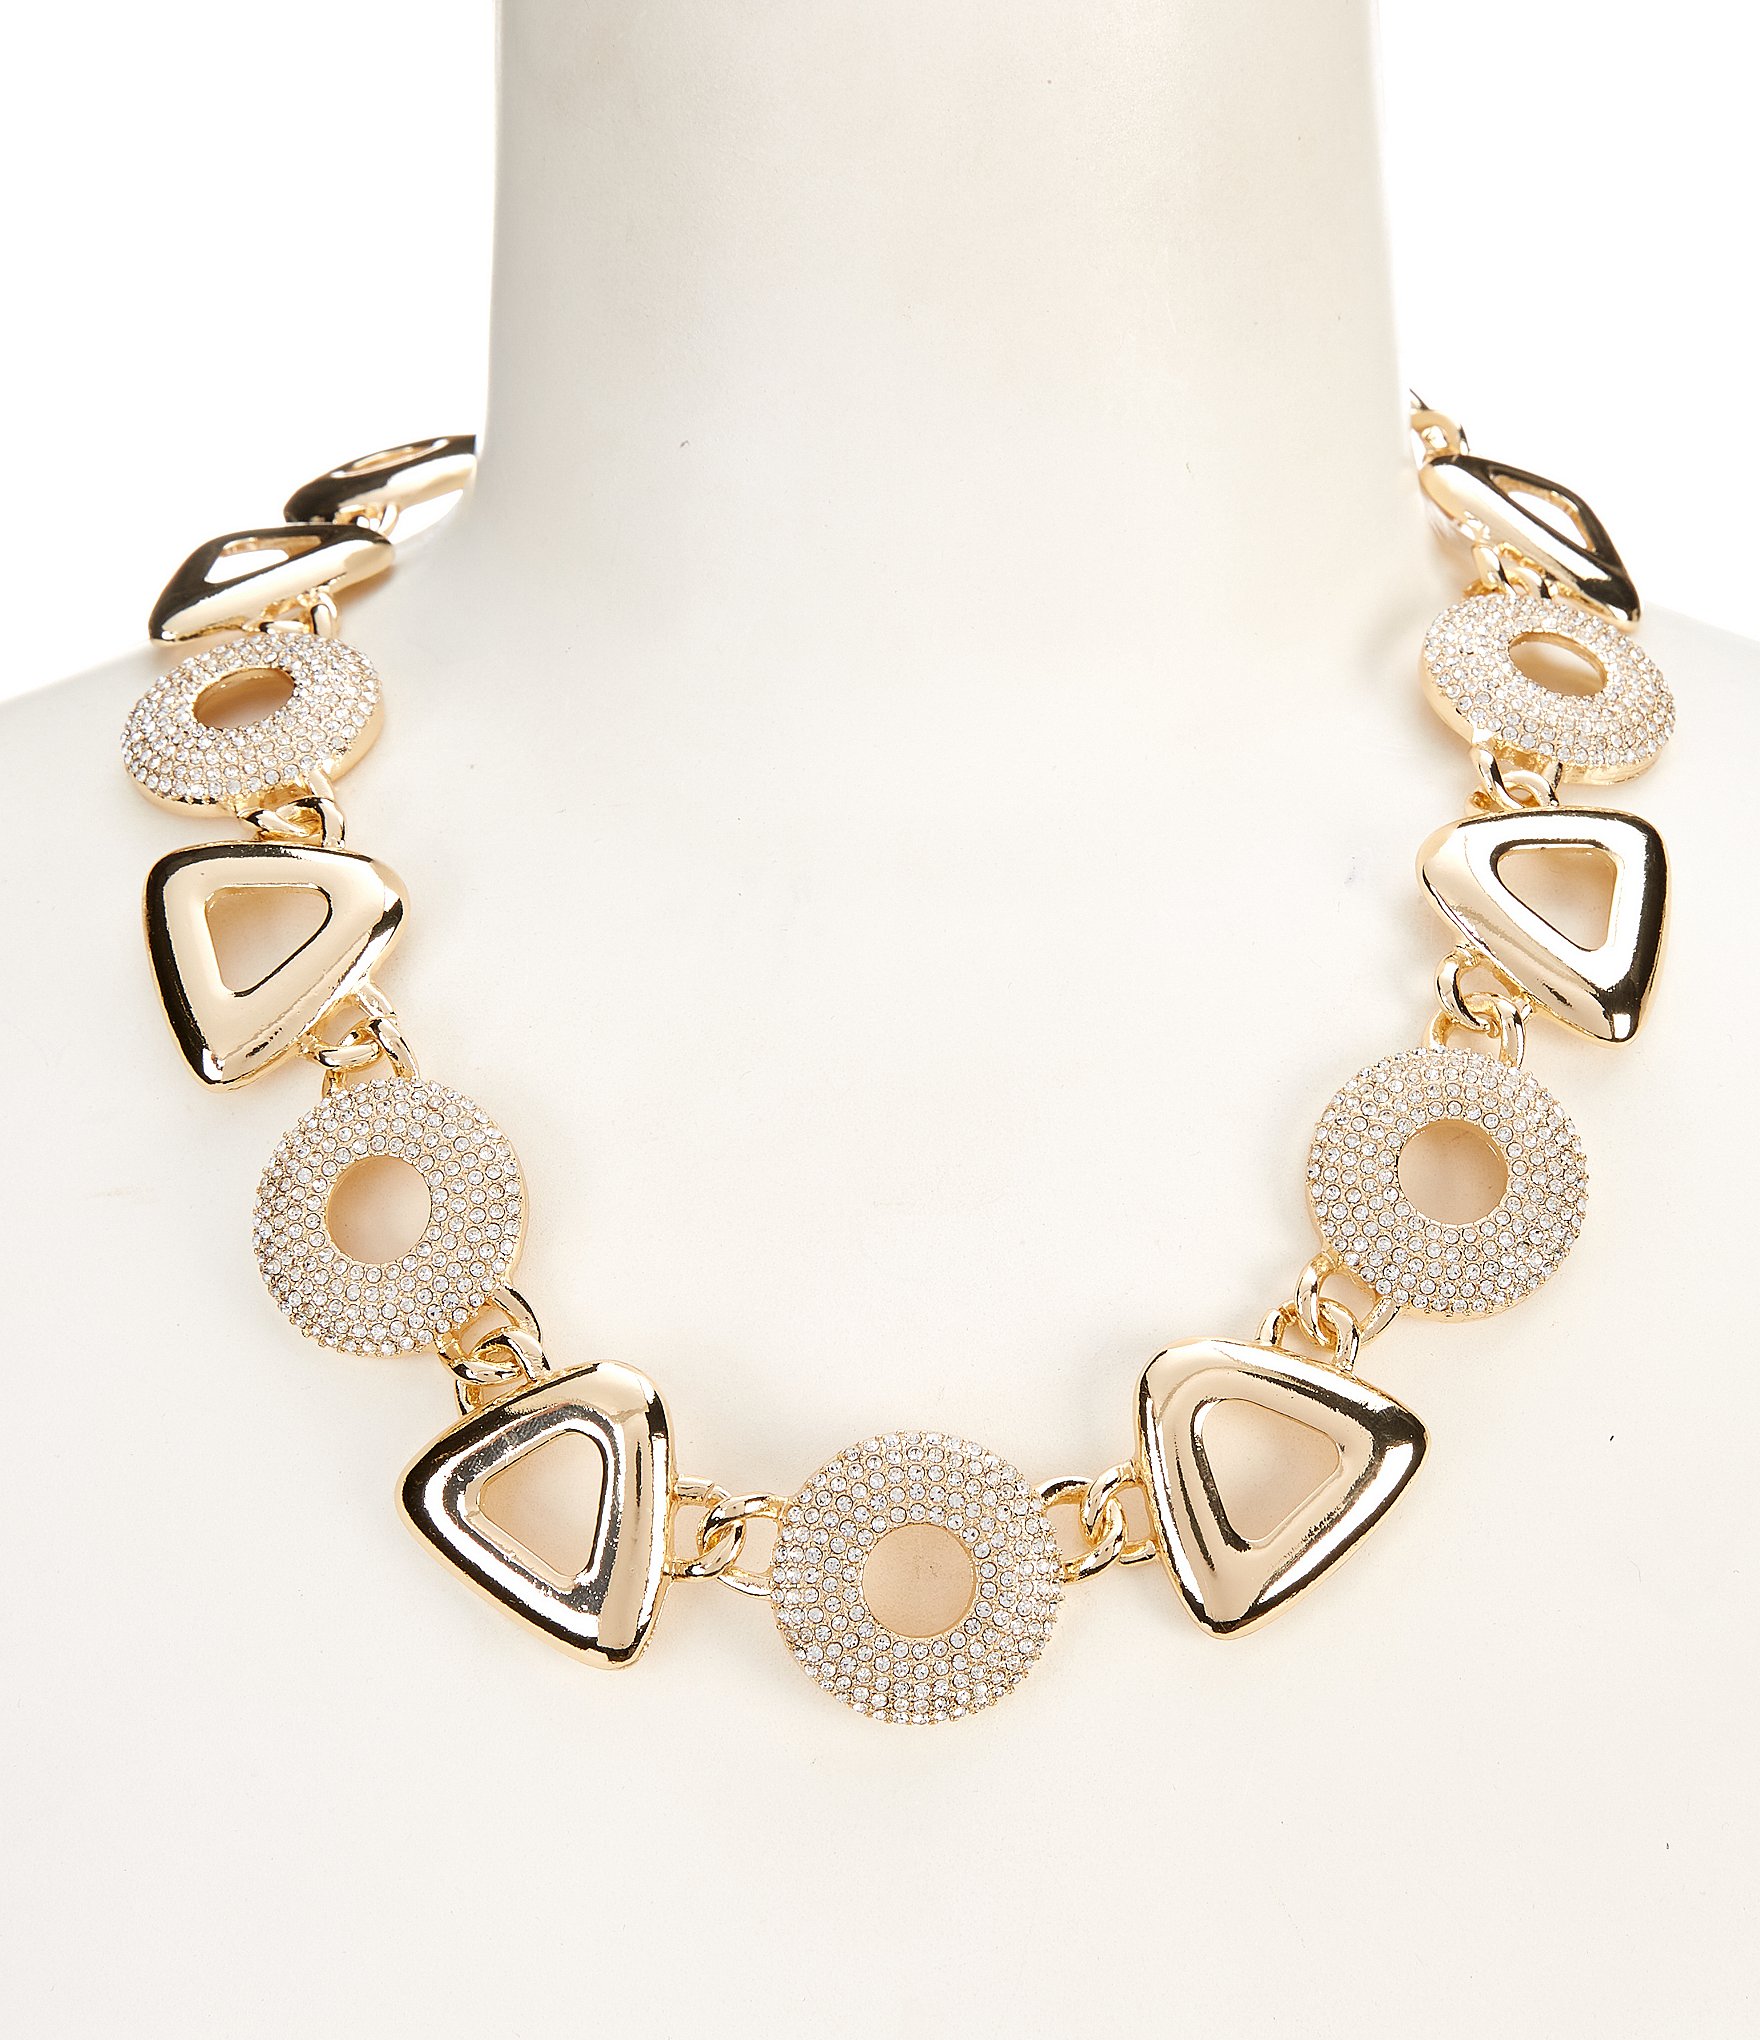 Anna & Ava Metal and Pave Shape Crystal Statement Necklace | Dillard's